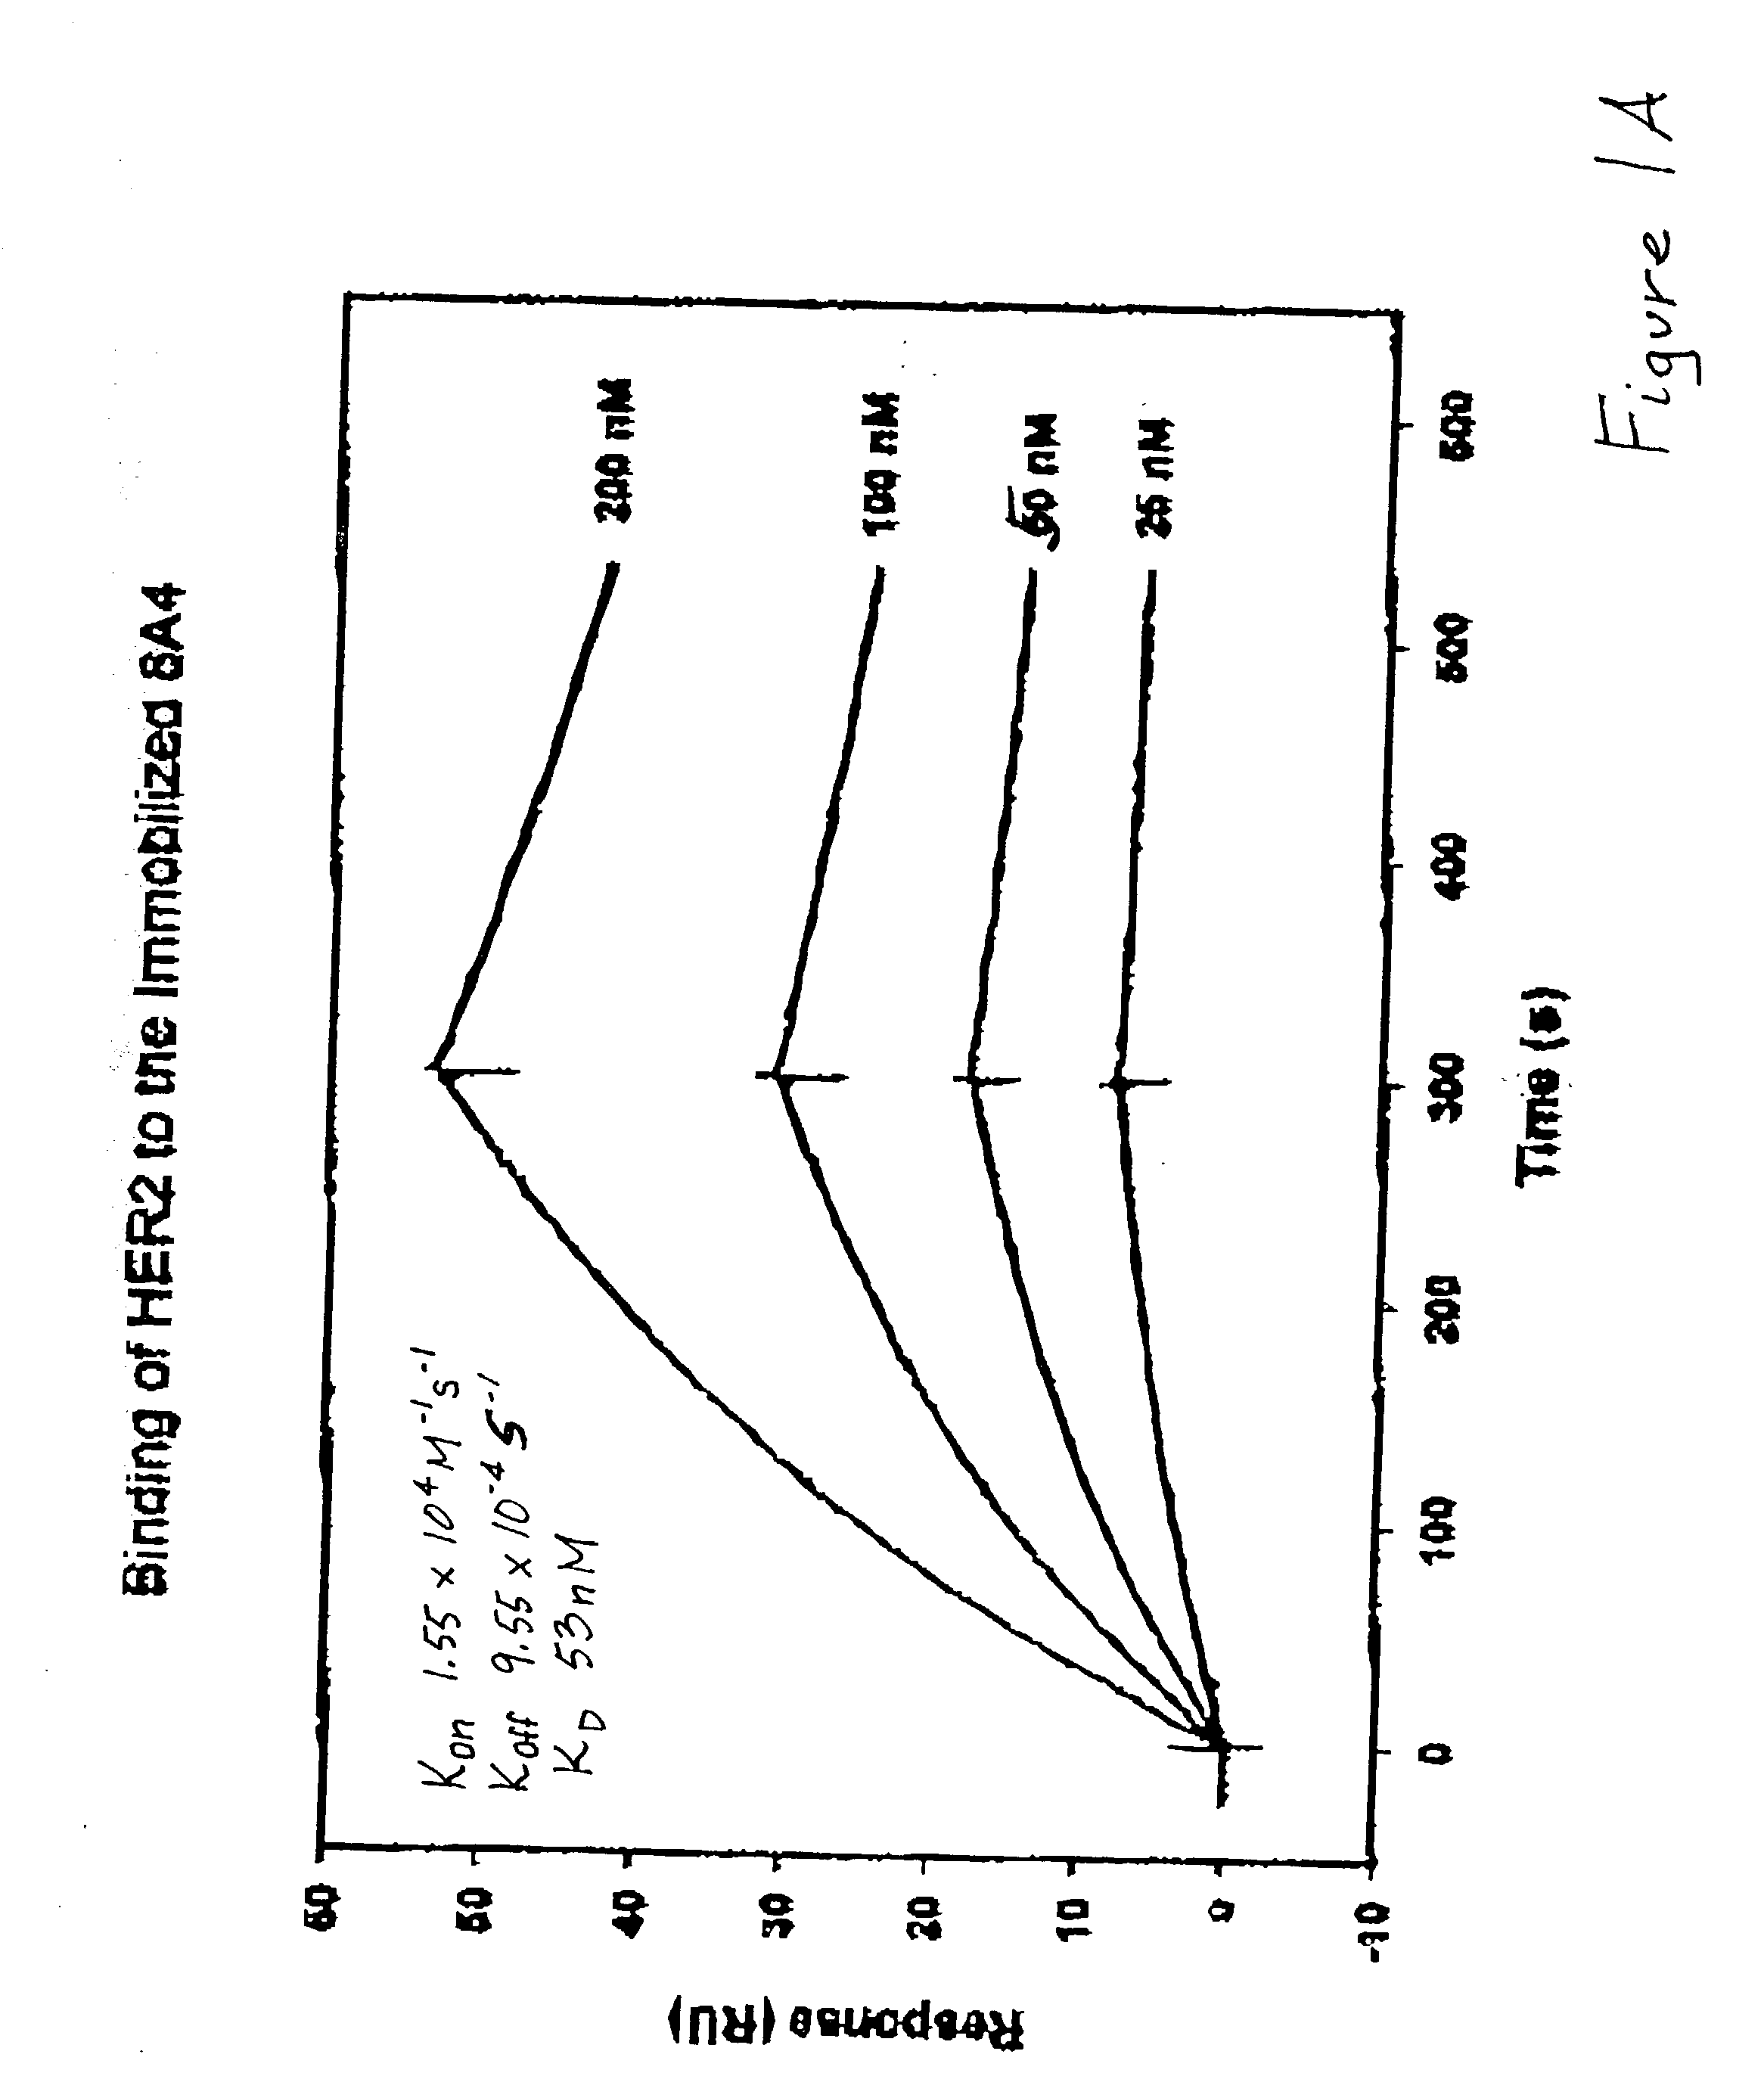 Monoclonal antibodies to activated erbB family members and methods of use thereof